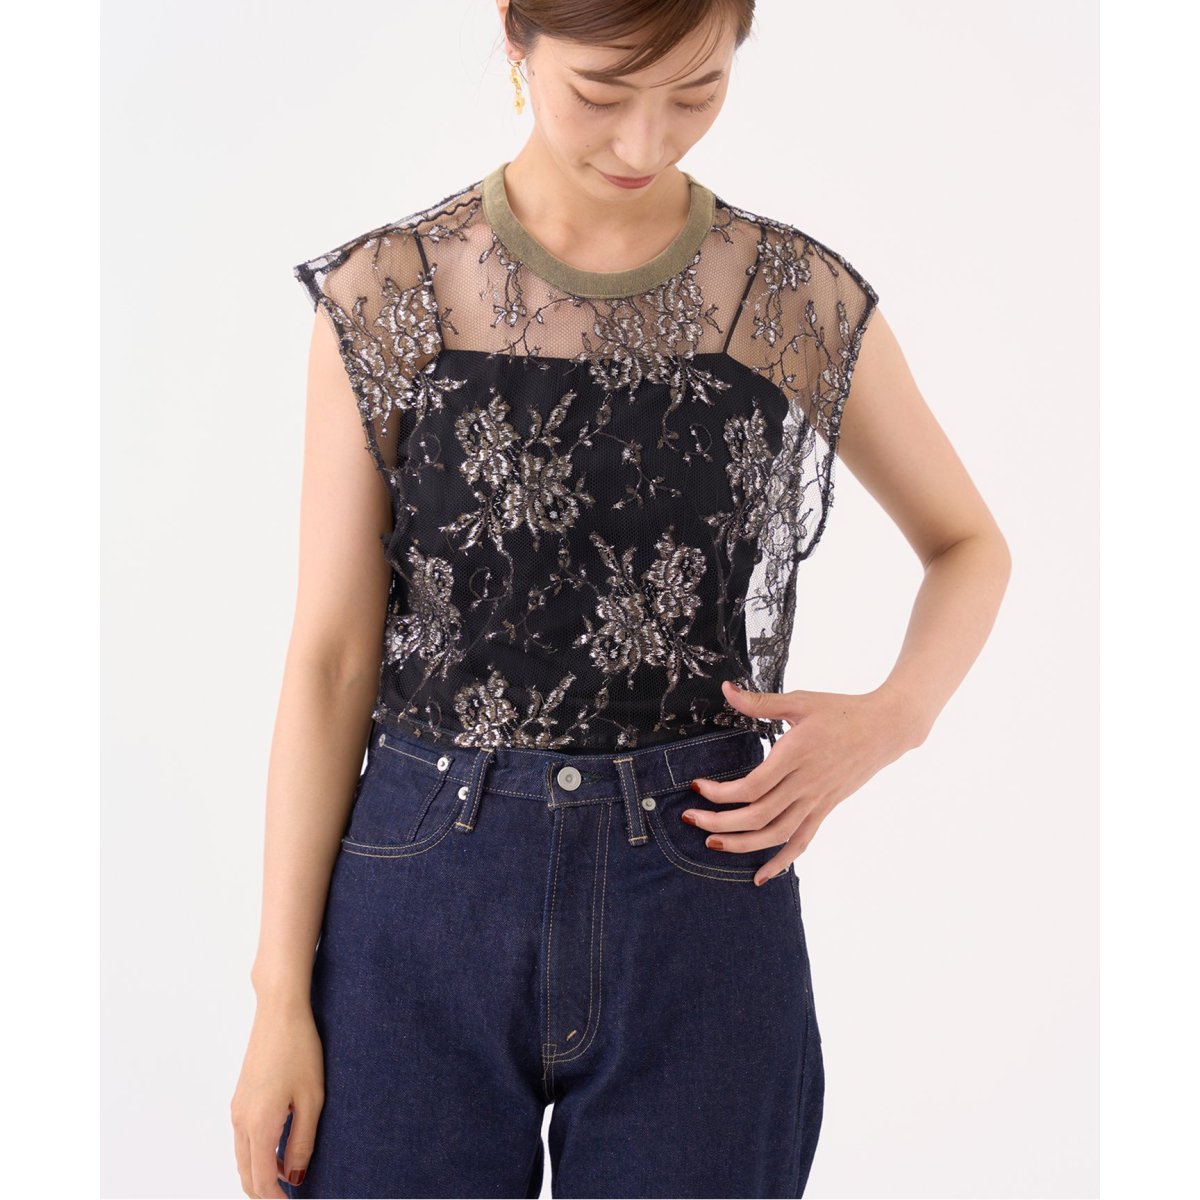 MARGE/マージ】LACE SHORT GILLET / レースショートジレ | イエナ(IENA